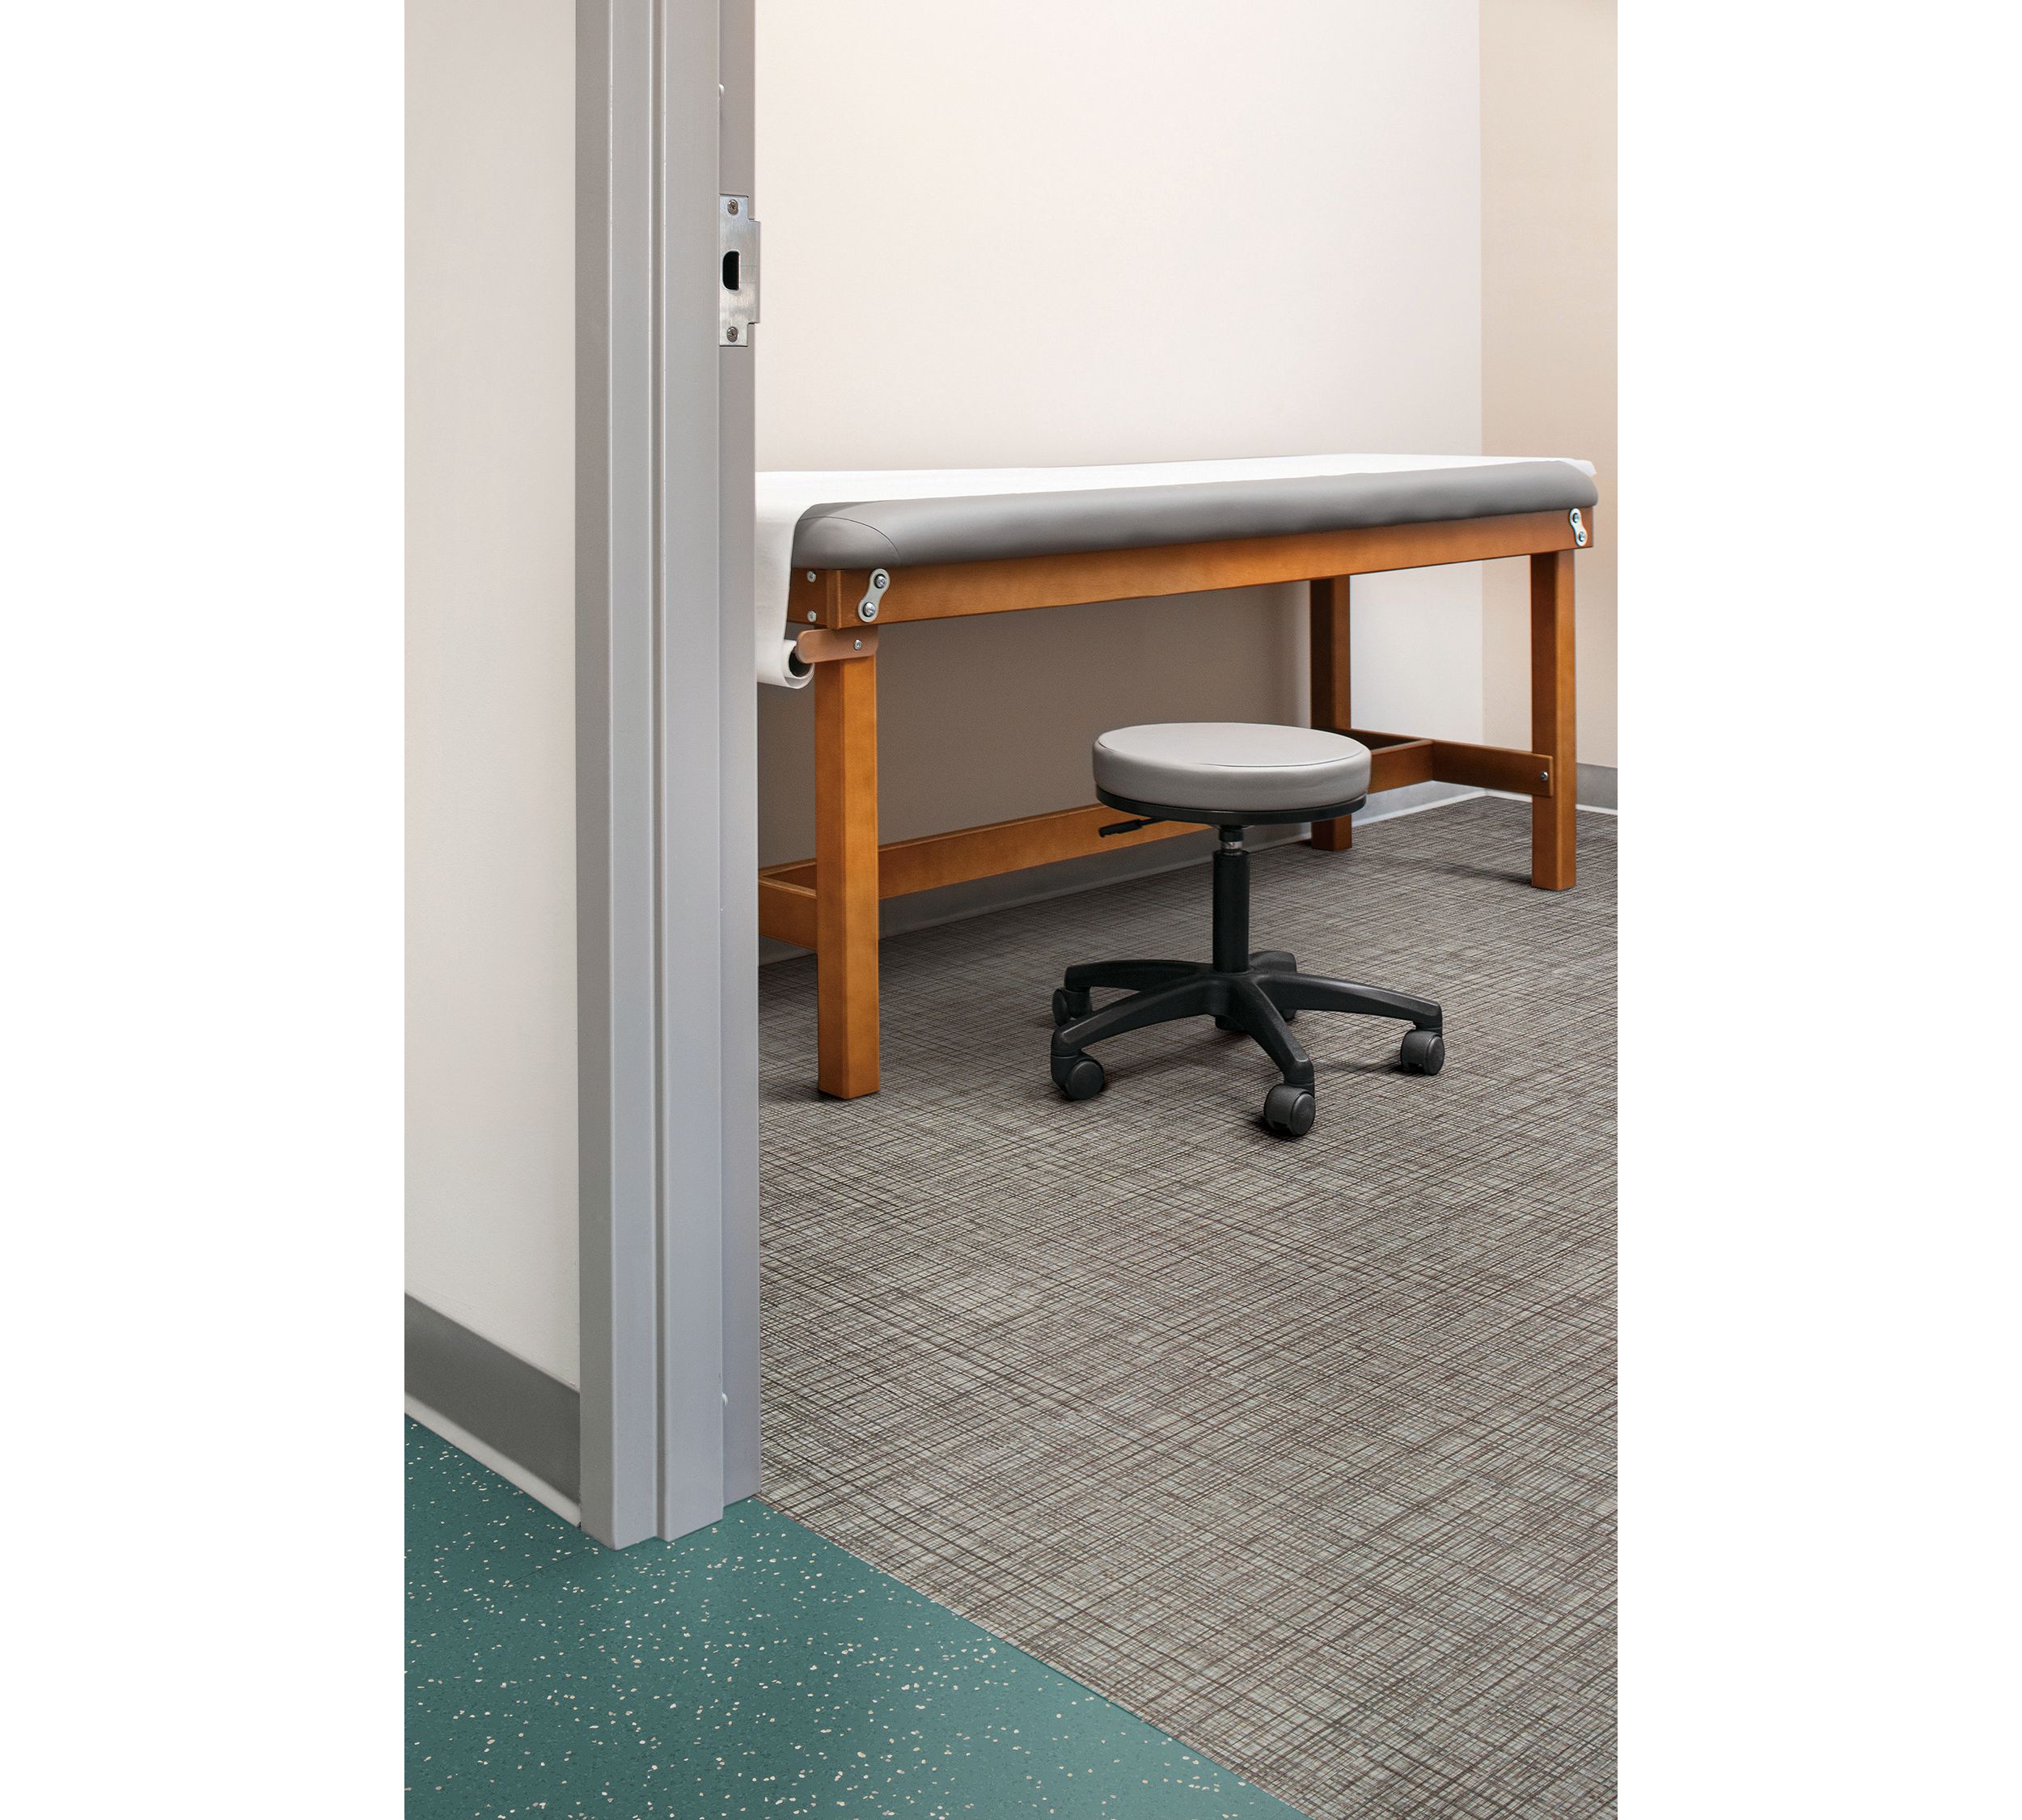 Interface Criterion Classic Wovens LVT and noraplan enironcare rubber flooring in patient room with table and rolling stool afbeeldingnummer 4